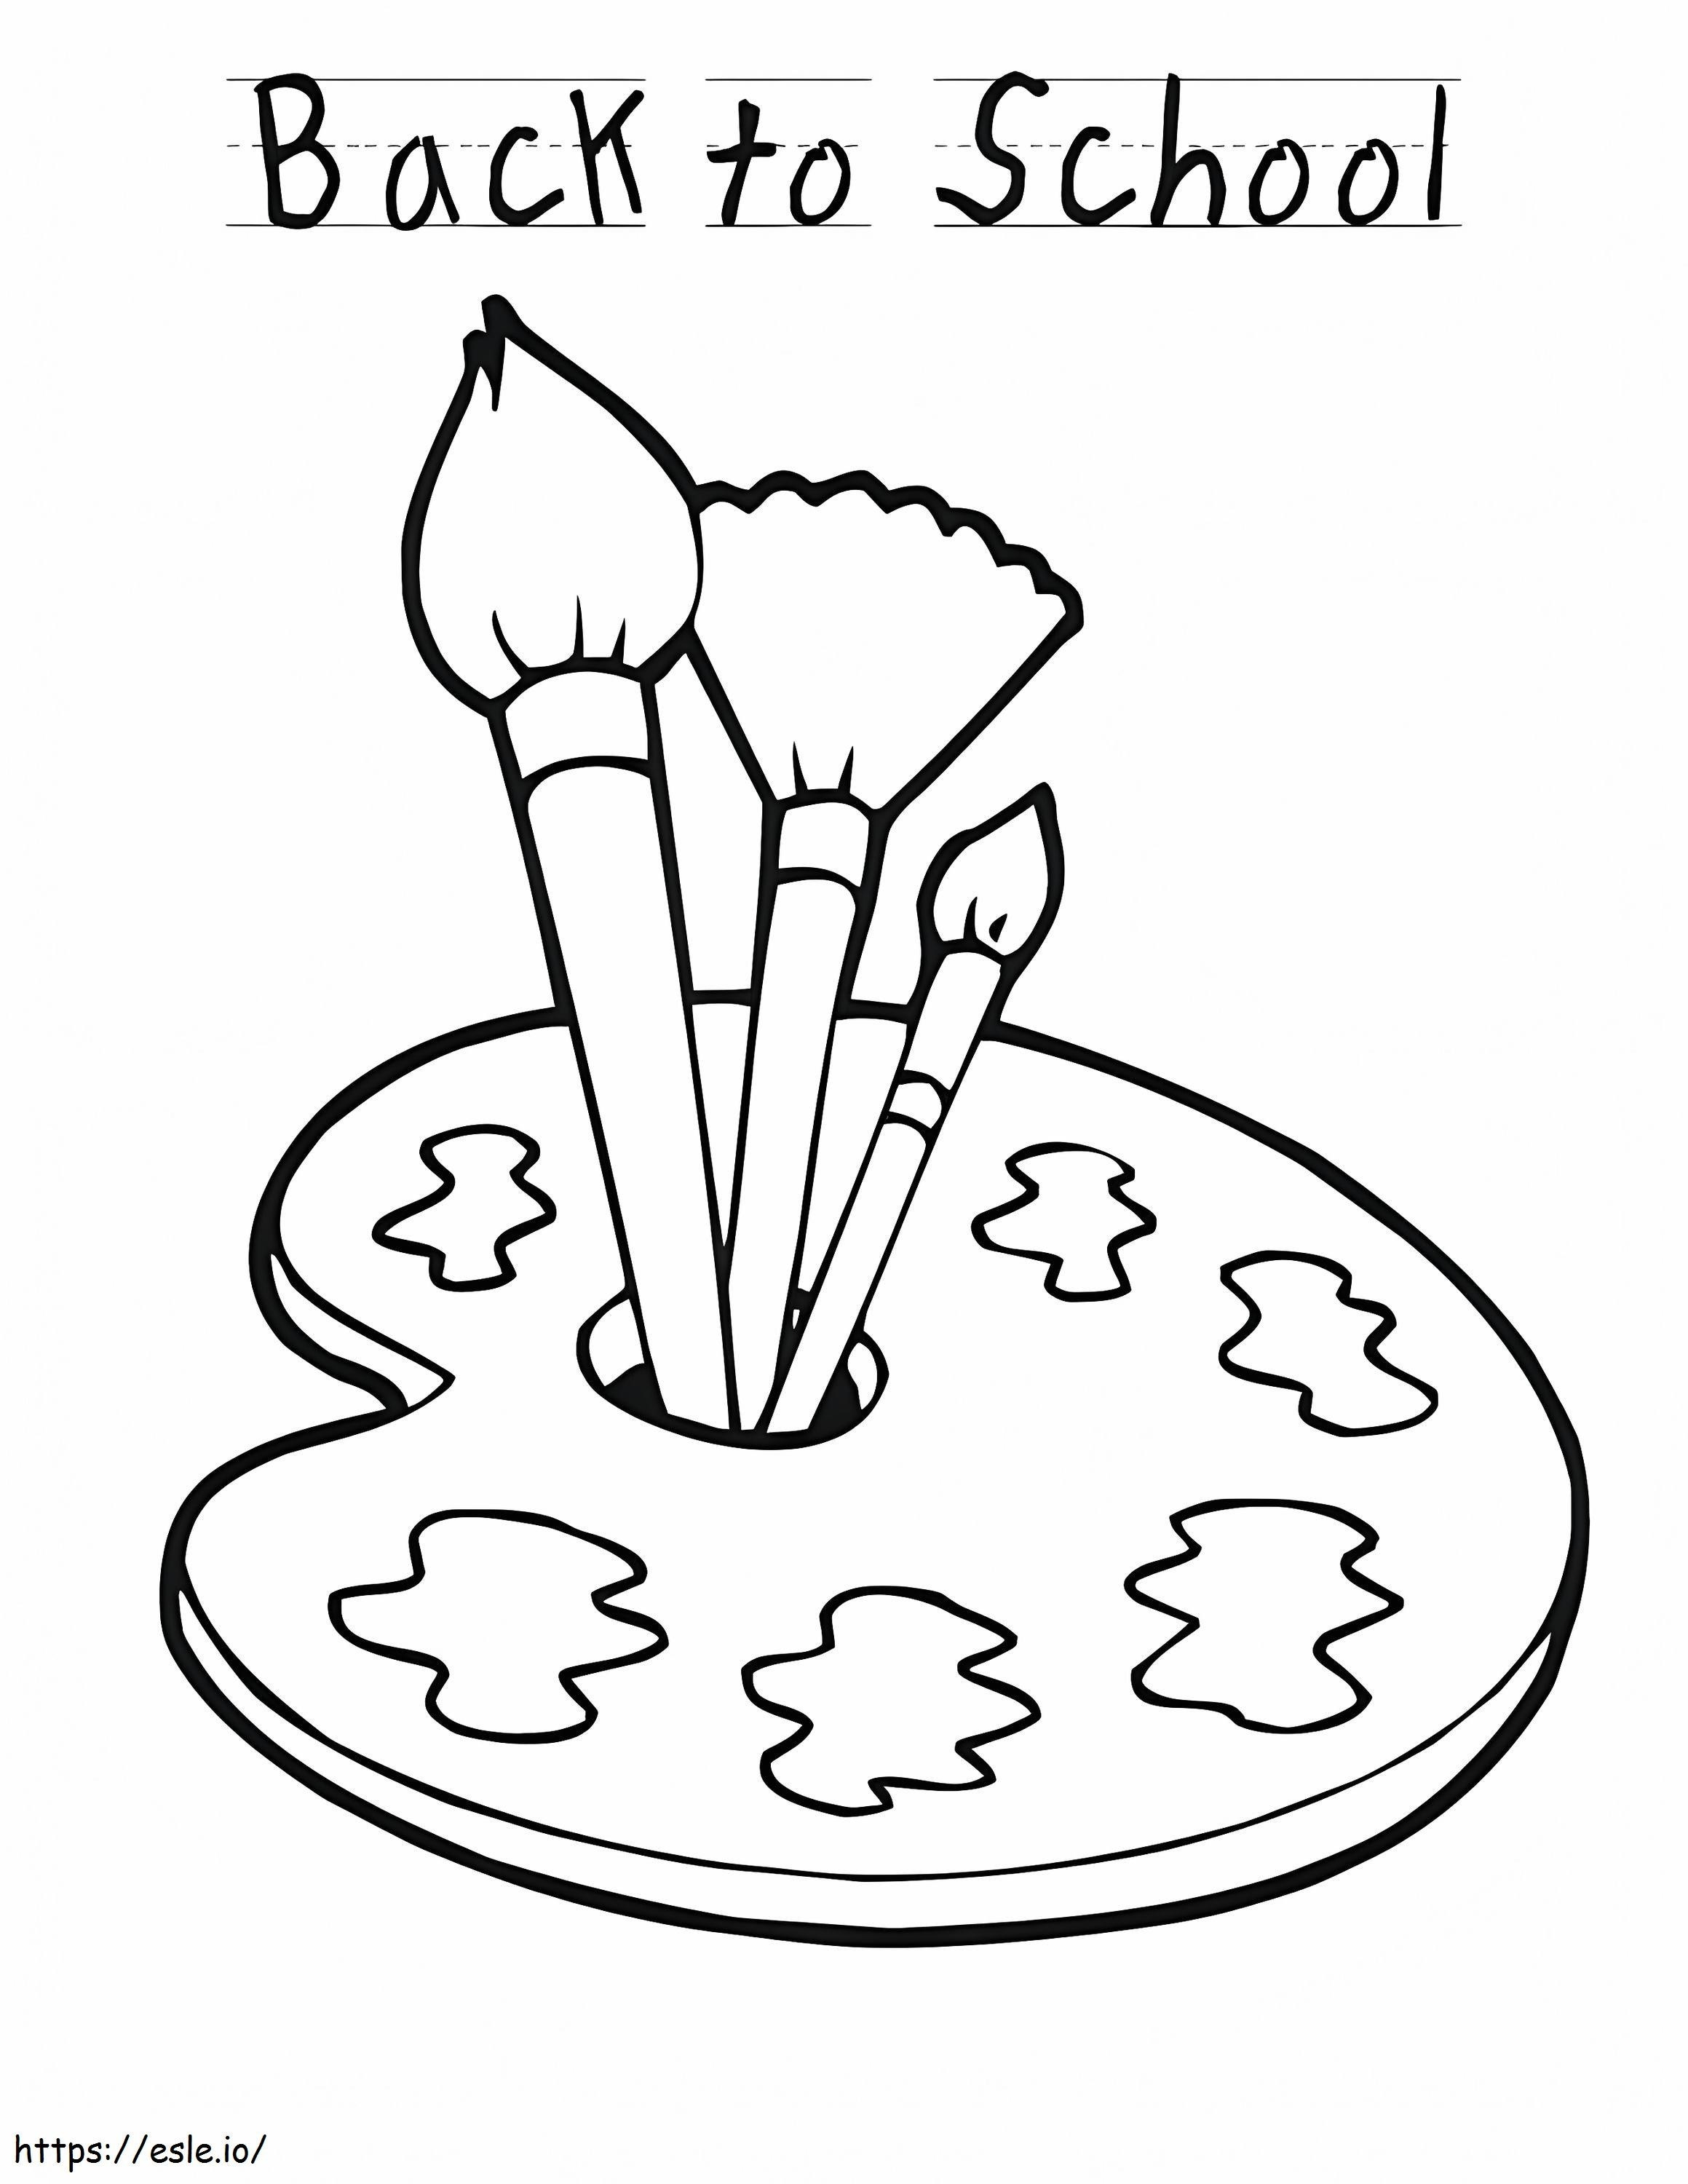 Back To School To Color coloring page